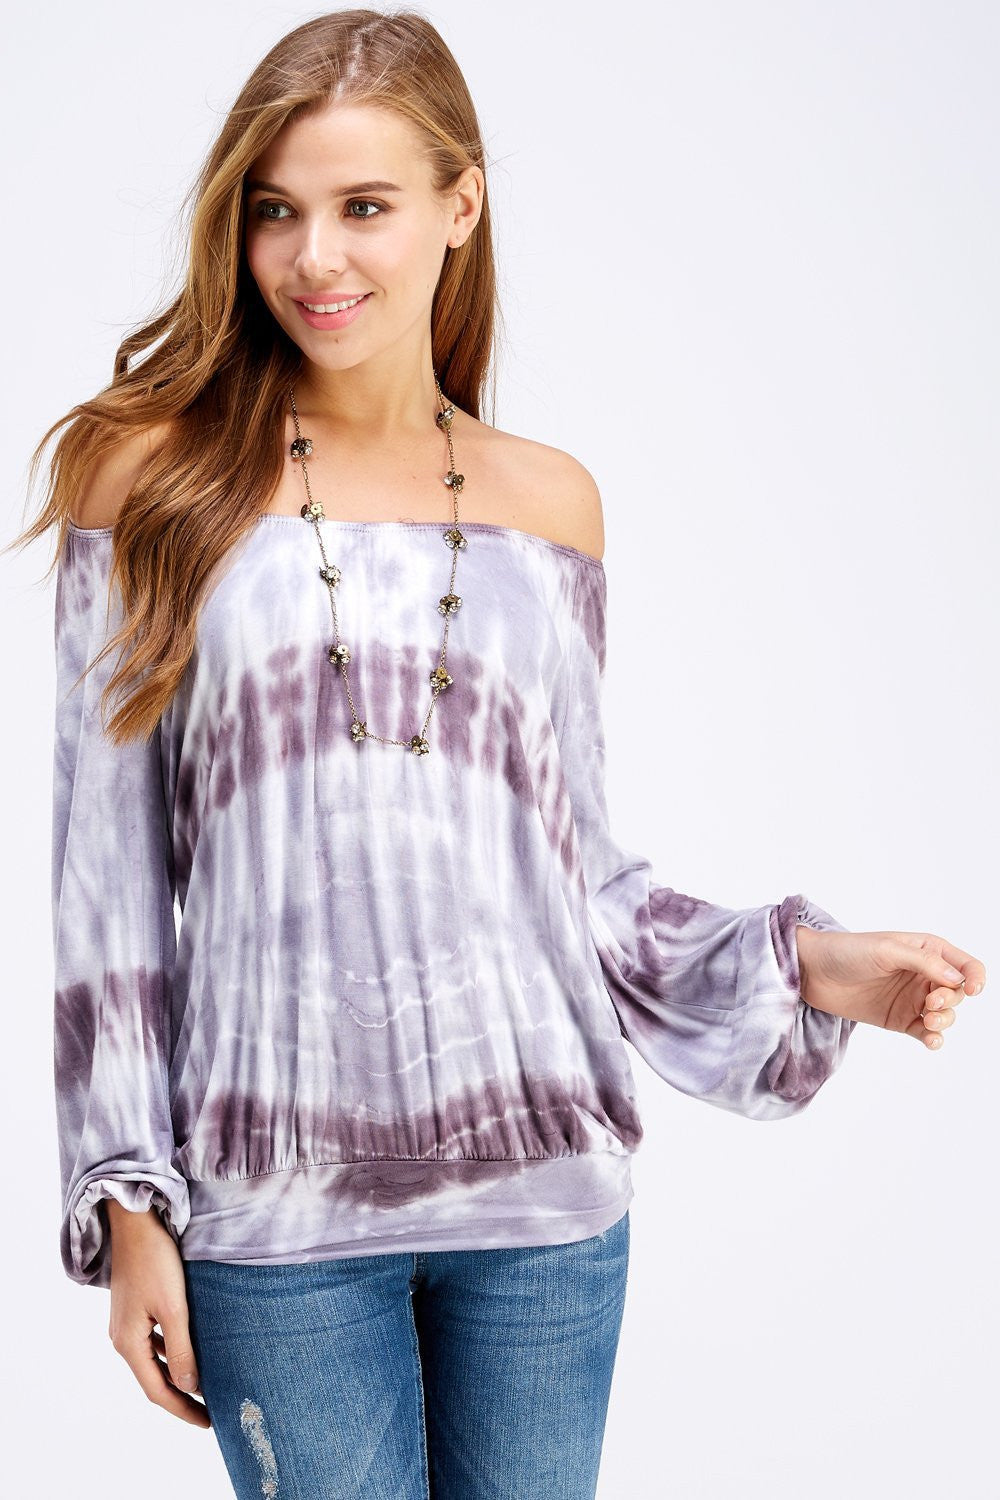 off shoulder Lilac eggplant blouse Perfect for any activity,relaxing day,beautiful and unique,comfortable and flattering